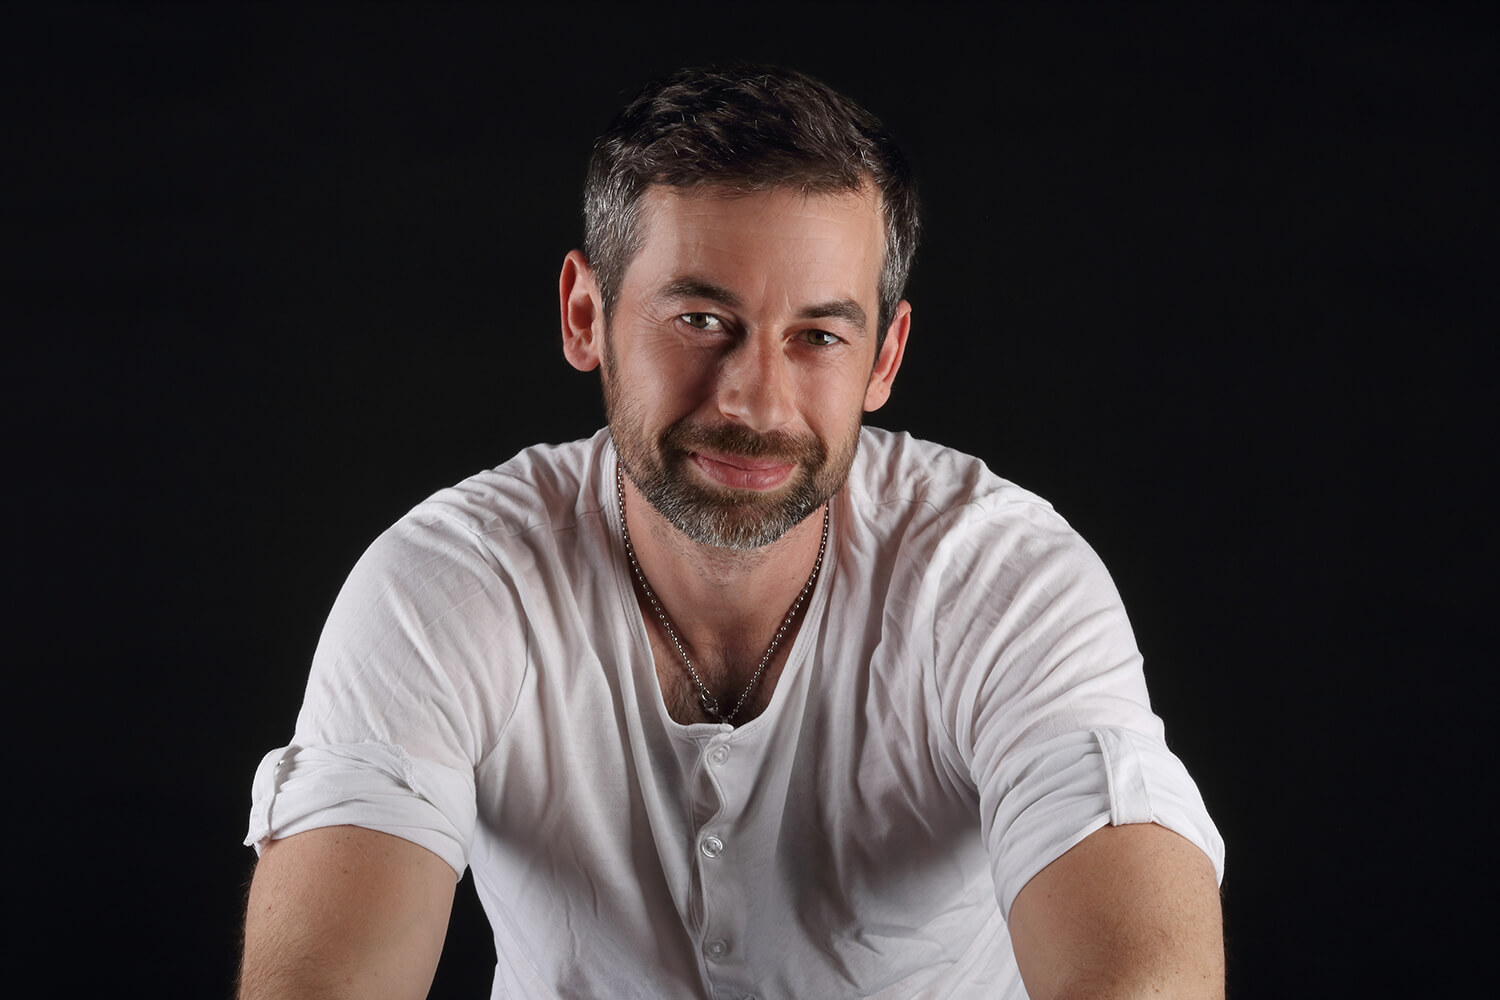 male portrait in a white T-shirt on a dark background